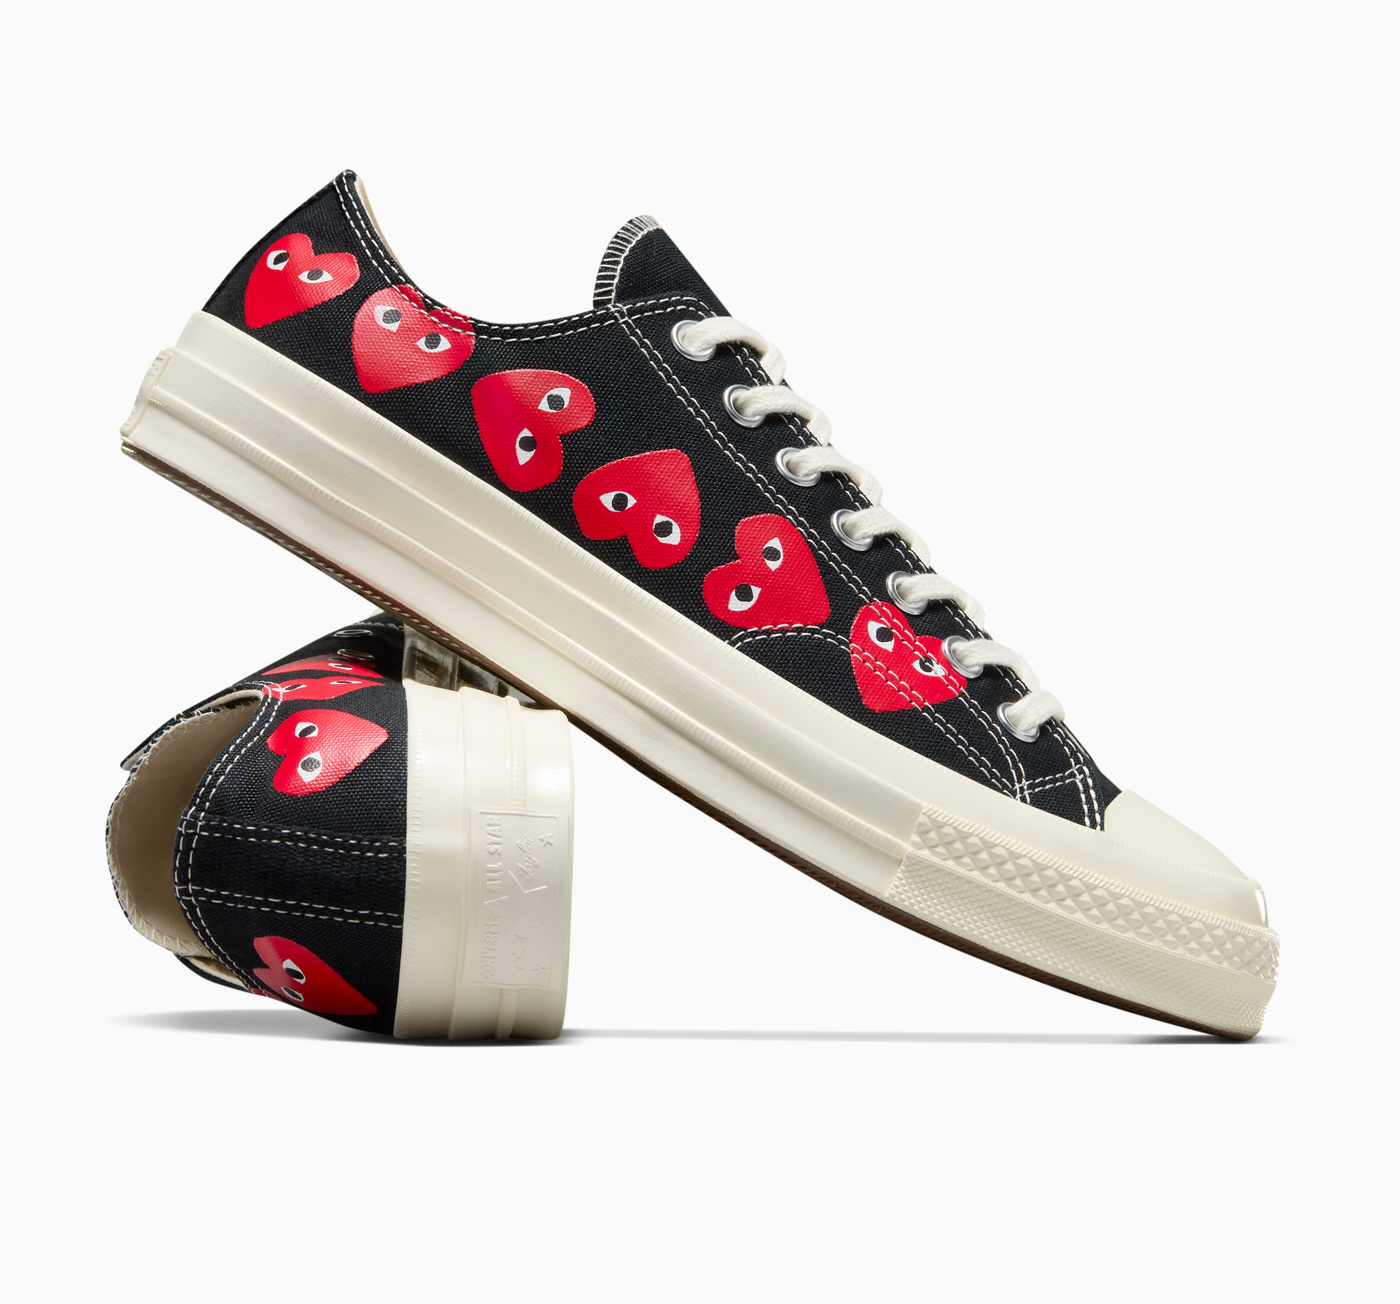 Multi Red Heart Chuck Taylor All Star '70 Low Sneakers (Black)